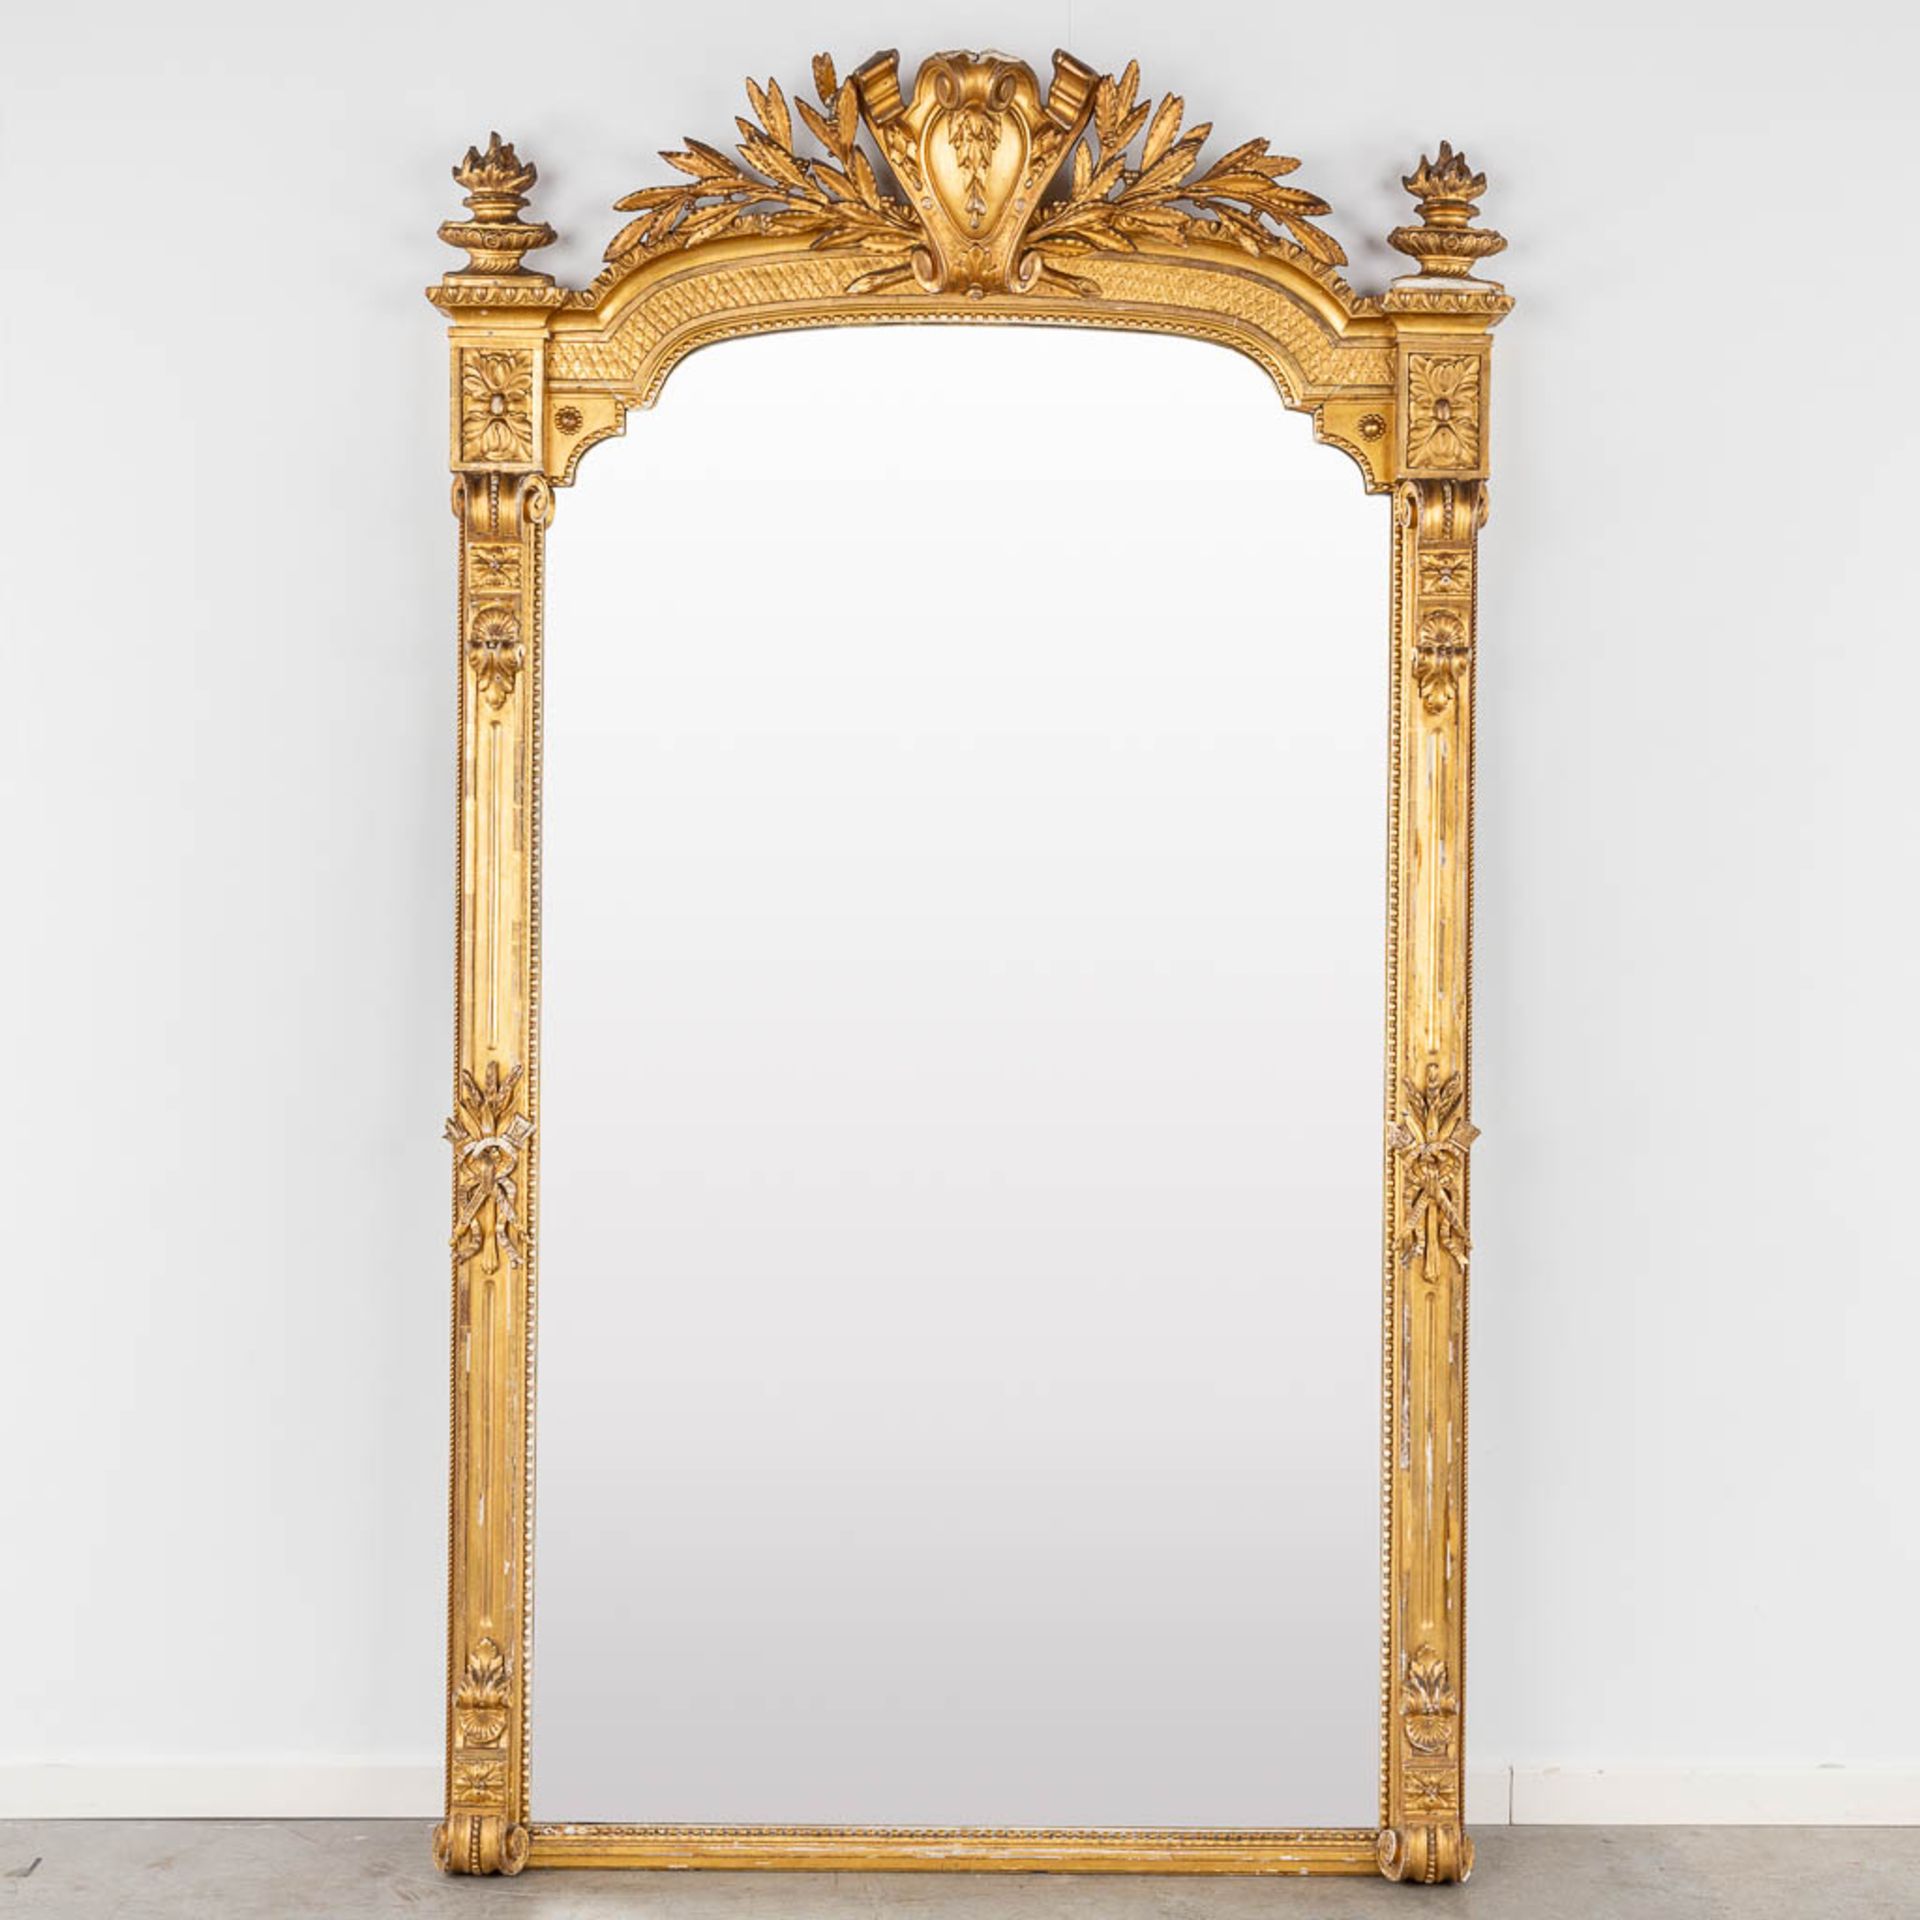 A large mirror, gilt wood and stucoo in Louis XVI style. Circa 1900. (W:123 x H:207 cm)